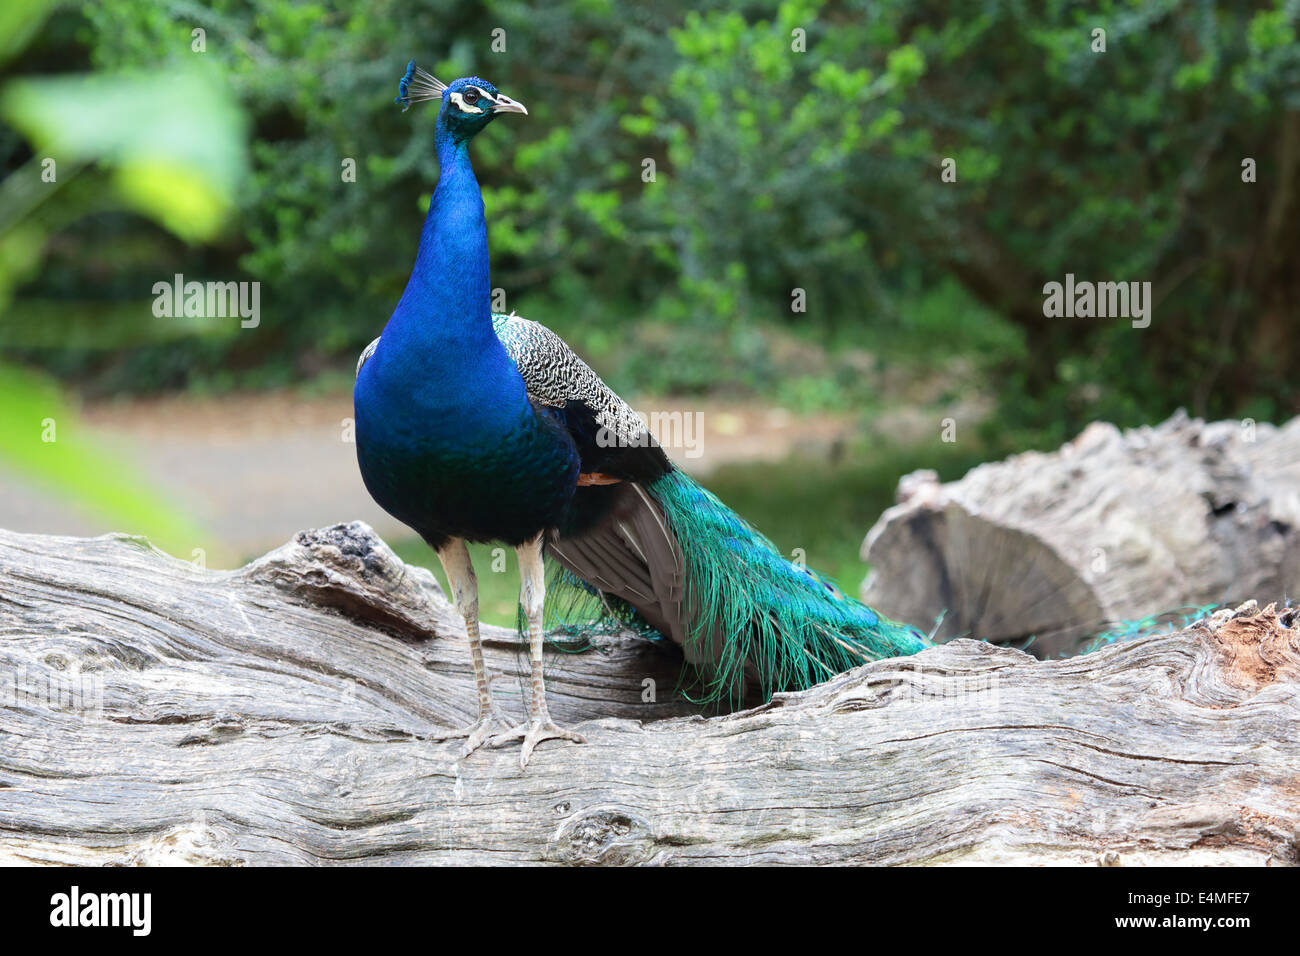 Indian peafowl (Pavo cristatus) standing on a branch Stock Photo